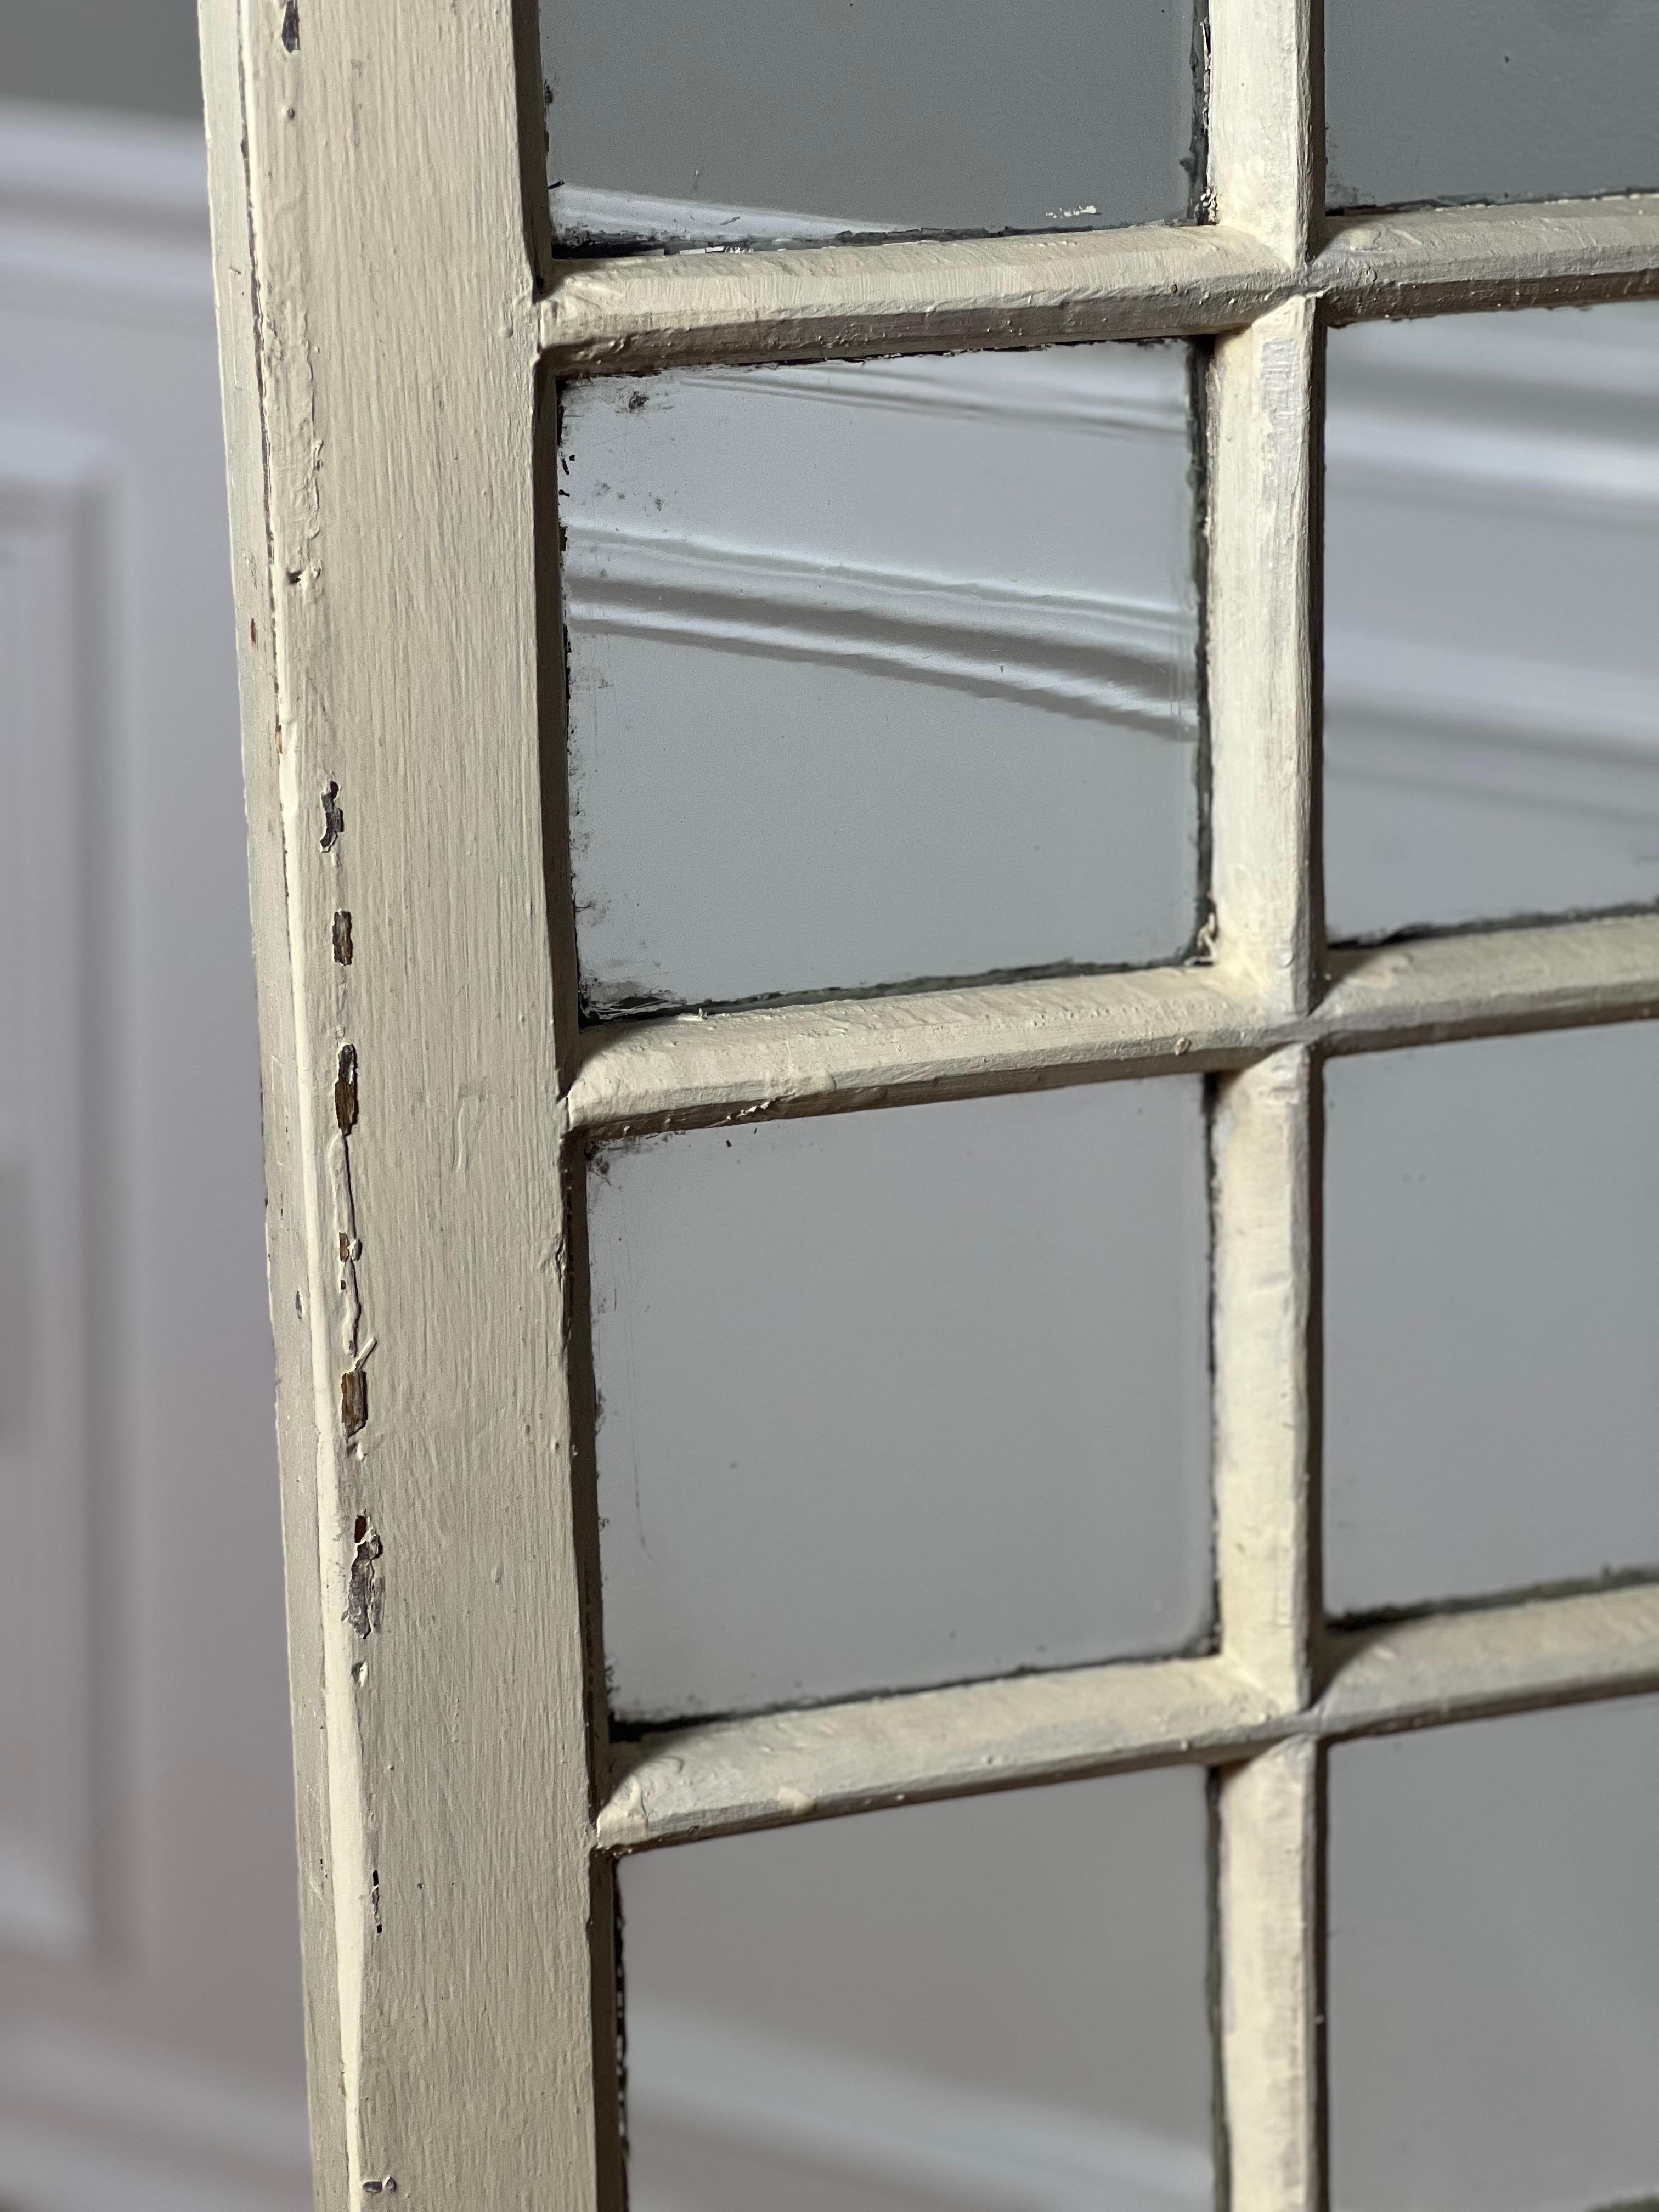 19th Century Large Rustic Painted Wood 32-Pane Window Sash with Original Glass For Sale 7